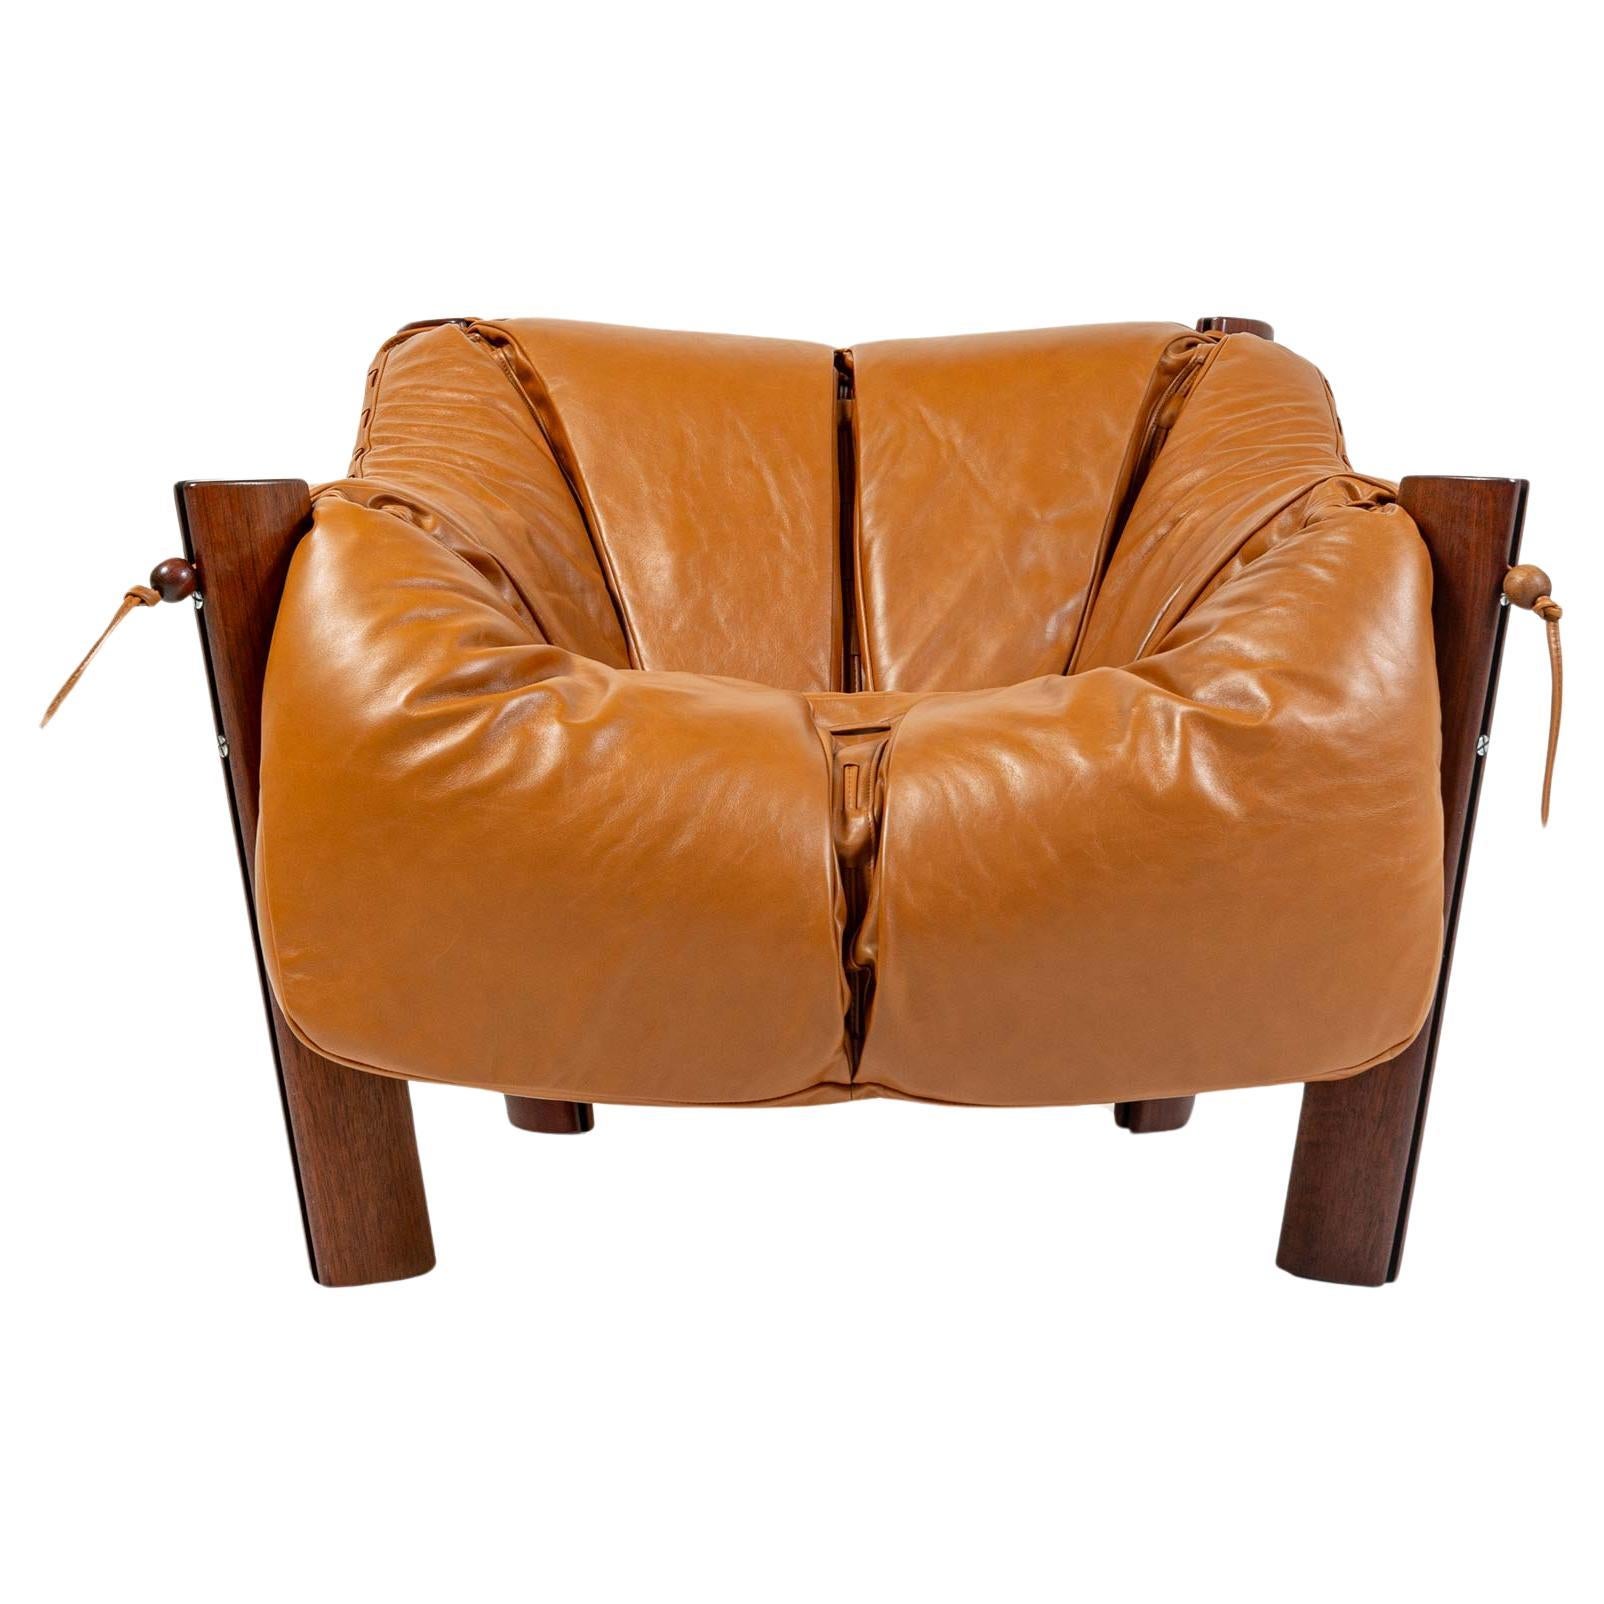 Percival Lafer MP-211 lounge chair in rosewood and Maharam Sorghum leather